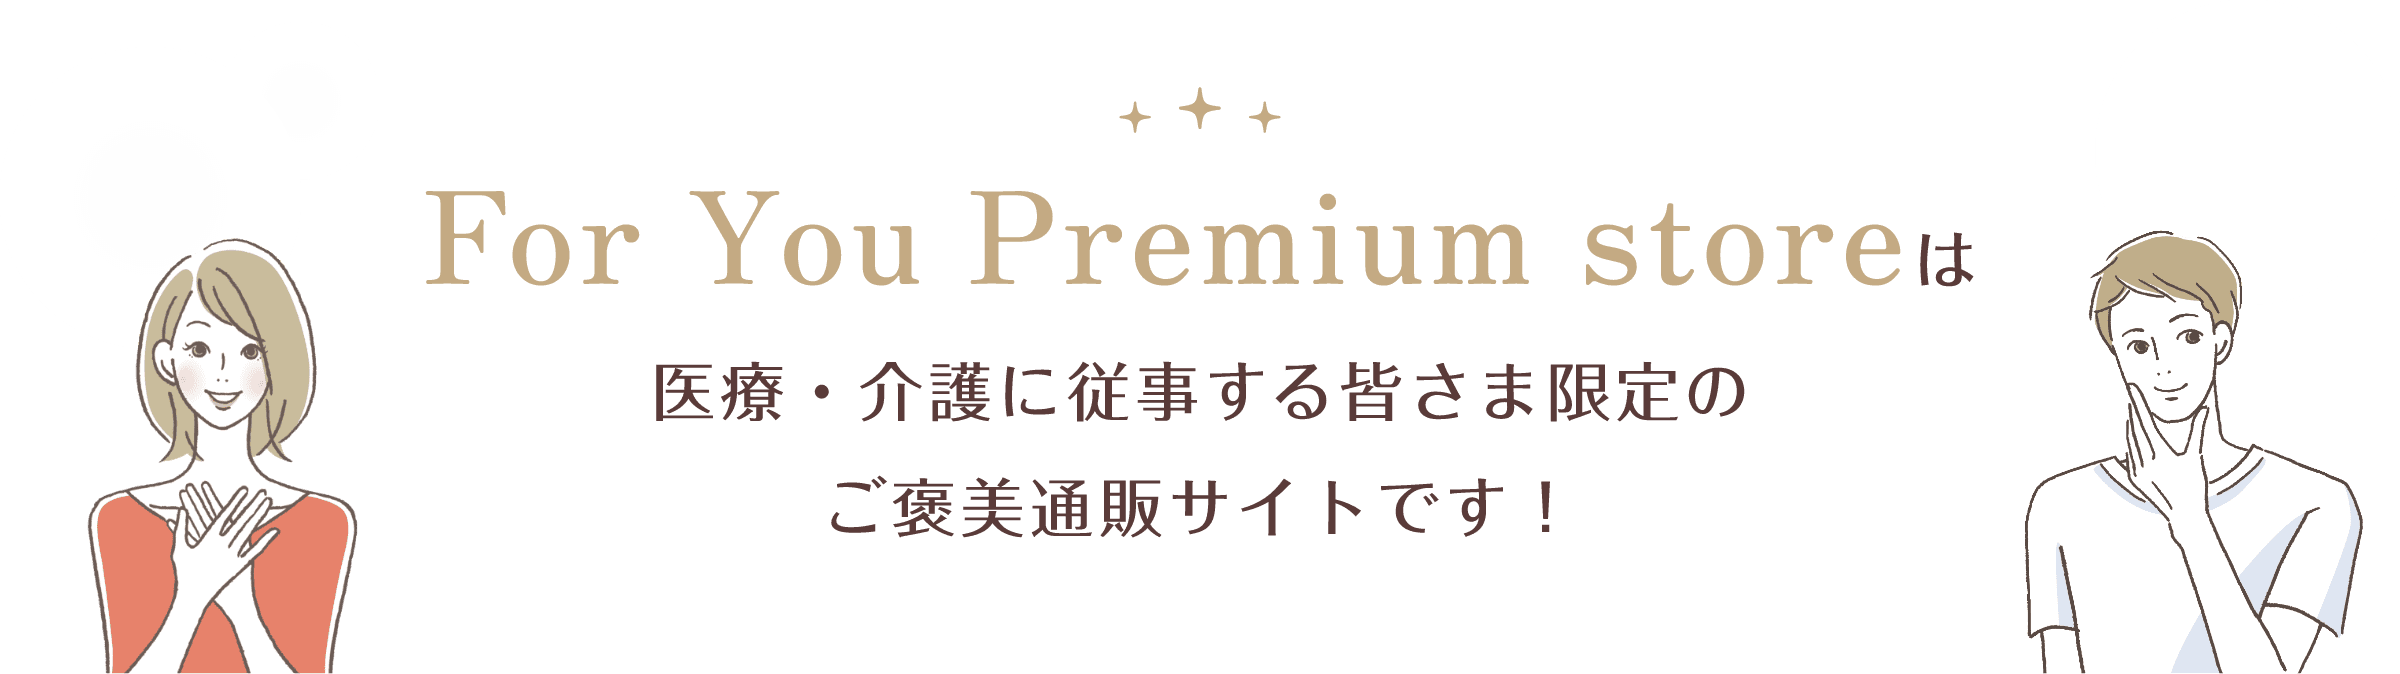 For You Premium storeは医療・介護に従事する皆さま限定のご褒美通販サイトです！